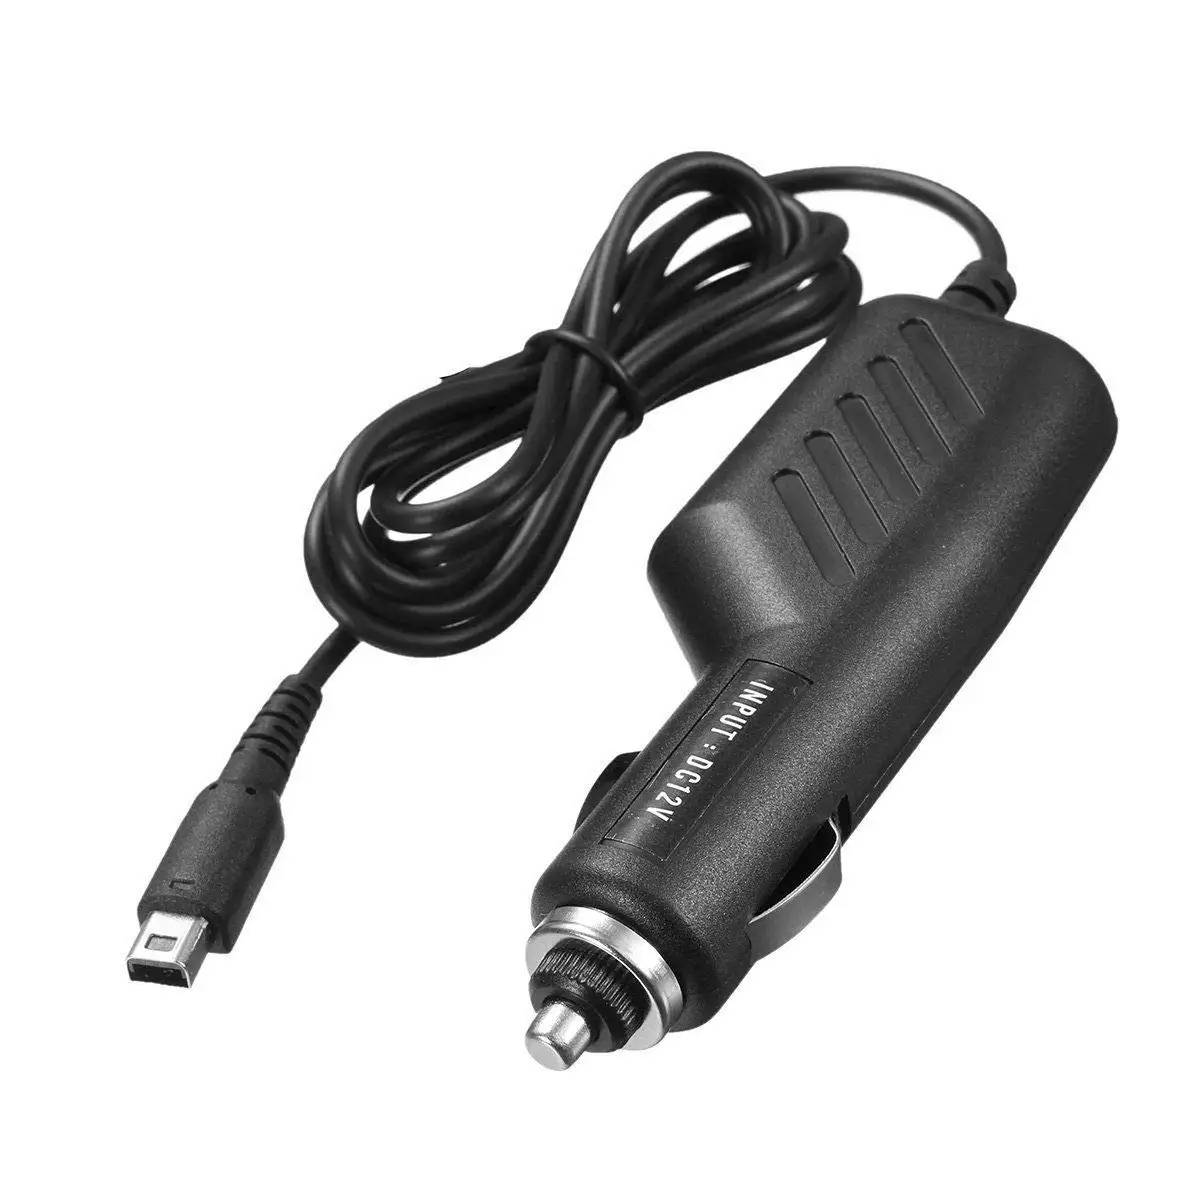 12V Car Charger AdapterためNintendo DSi / 3DS / 2DS / XL / New Models